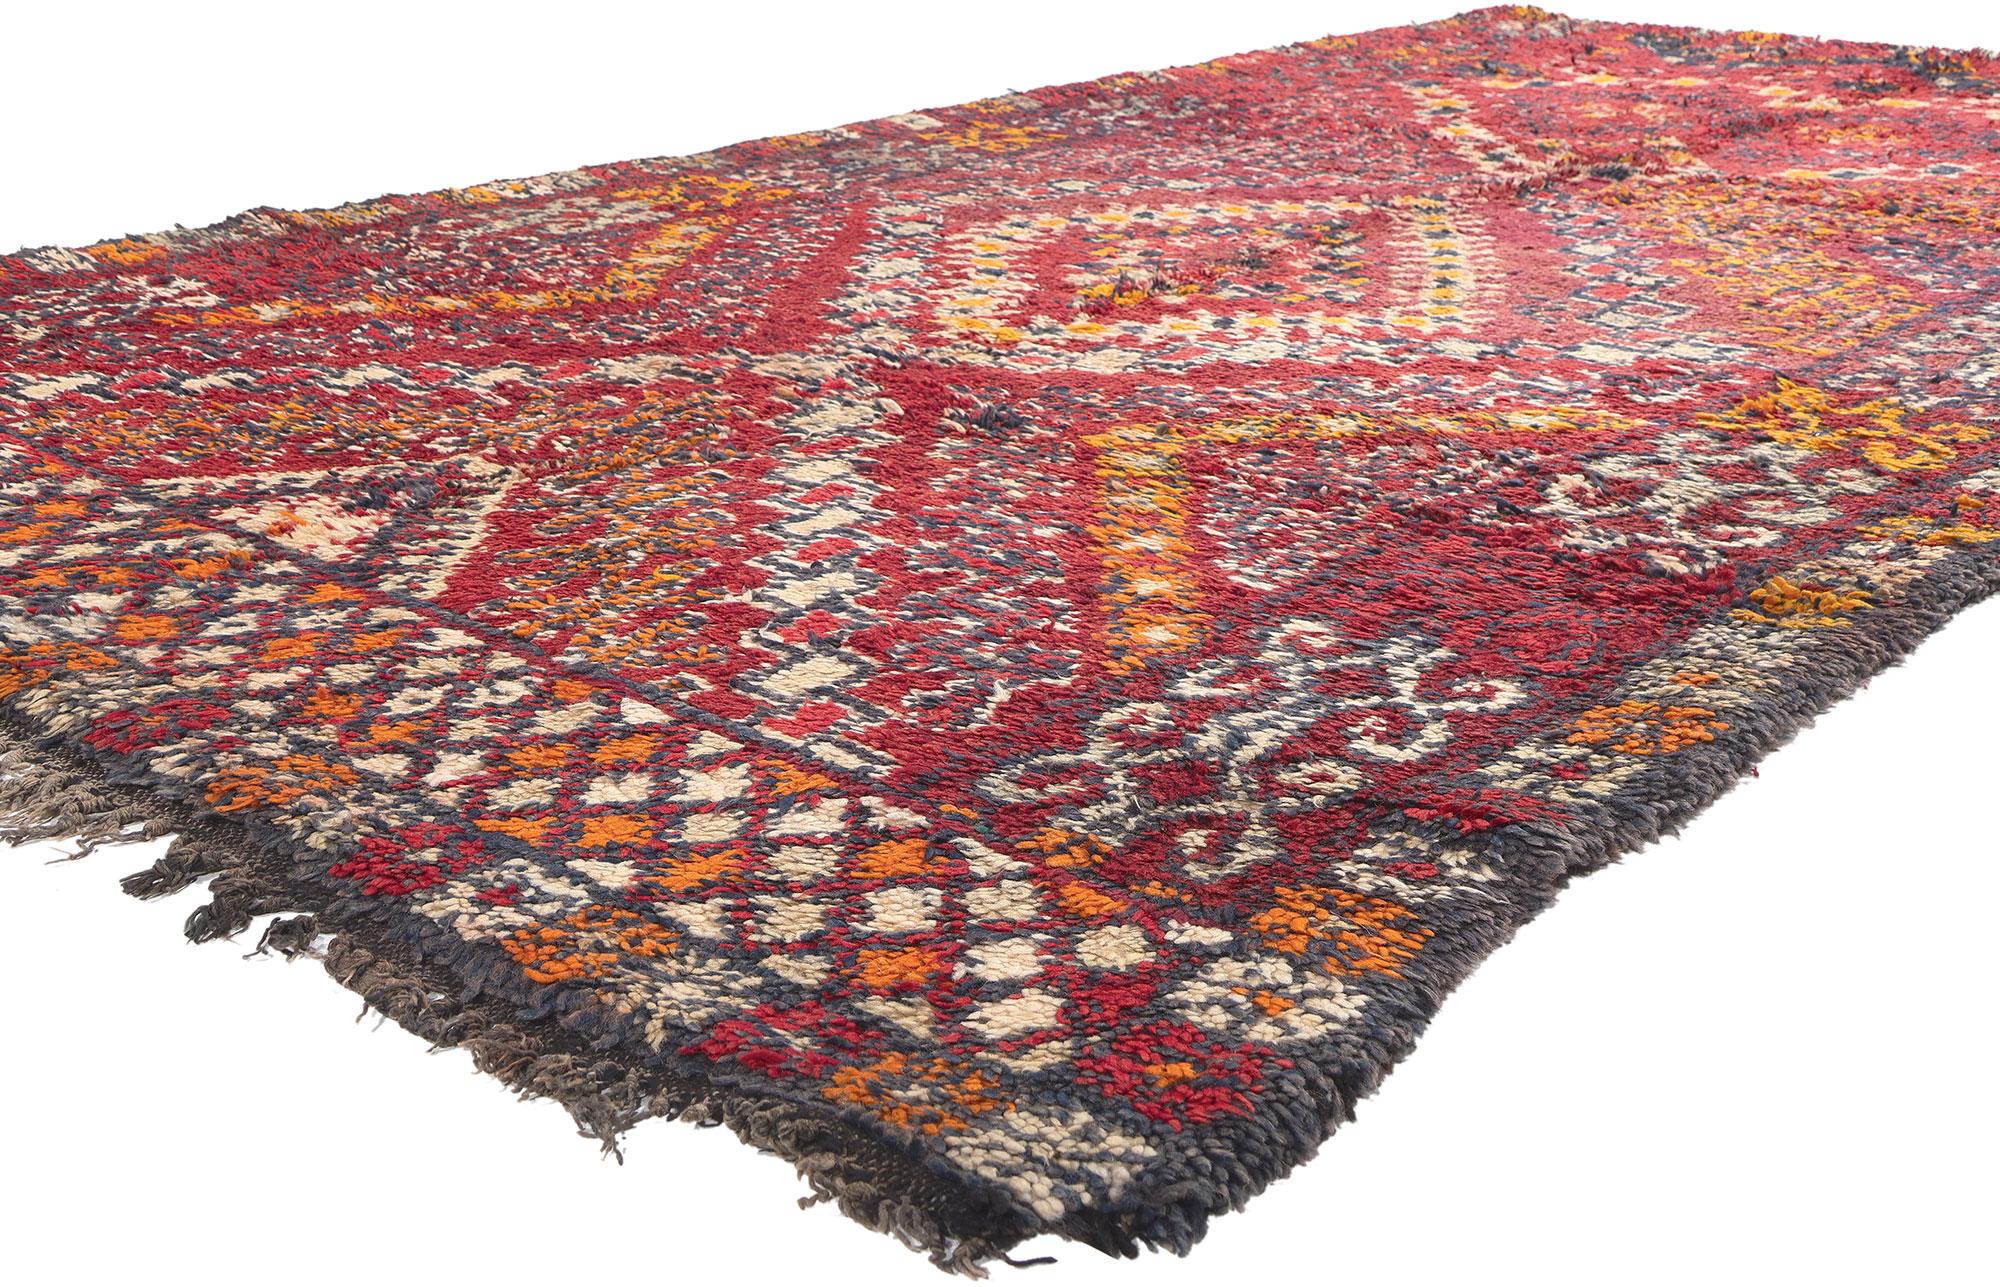 20977 Vintage Red Beni MGuild Moroccan Rug, 06'02 x 011'04. This vintage Beni MGuild rug stands as a testament to the rich culture of Moroccan craftsmanship, meticulously handwoven by the skilled artisans of the Beni MGuild tribe—a distinct subset